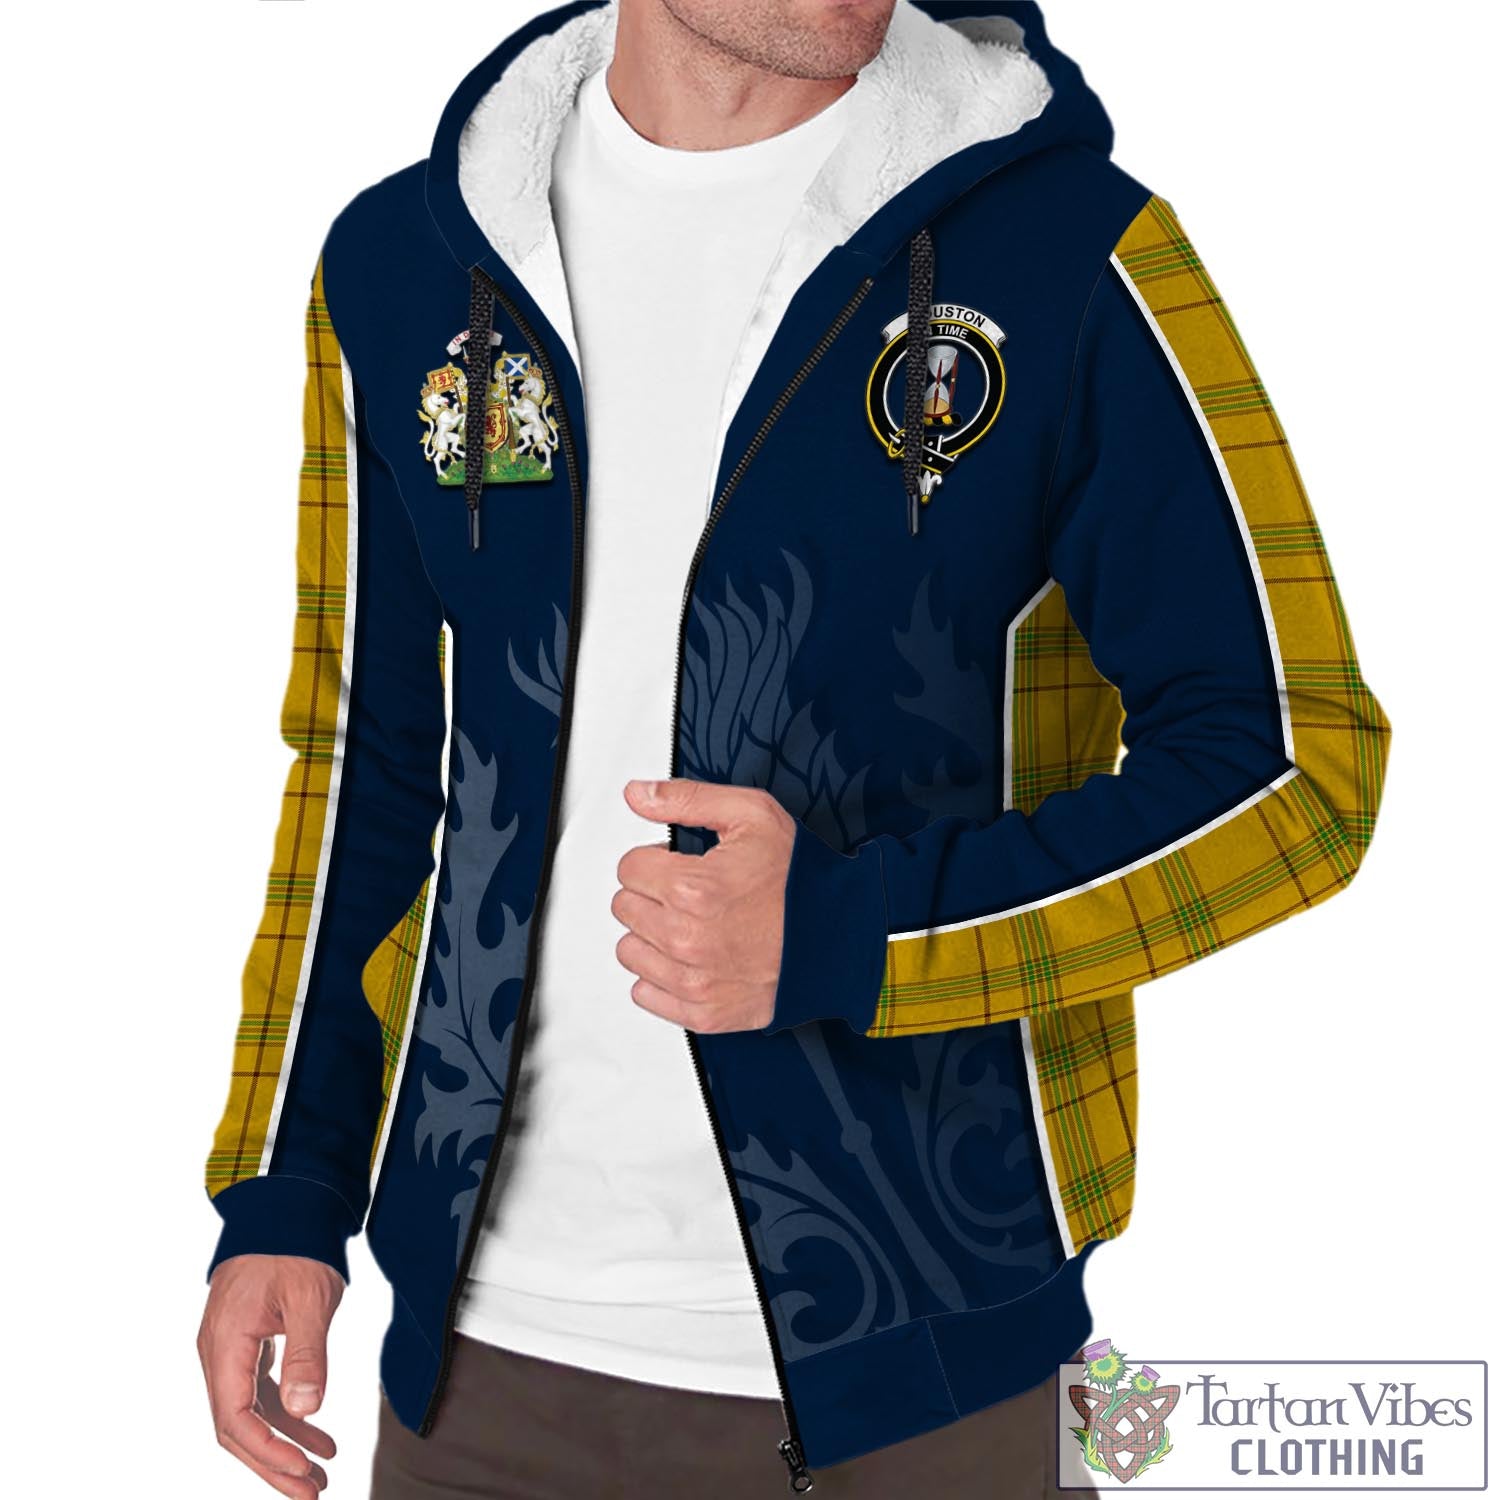 Tartan Vibes Clothing Houston Tartan Sherpa Hoodie with Family Crest and Scottish Thistle Vibes Sport Style